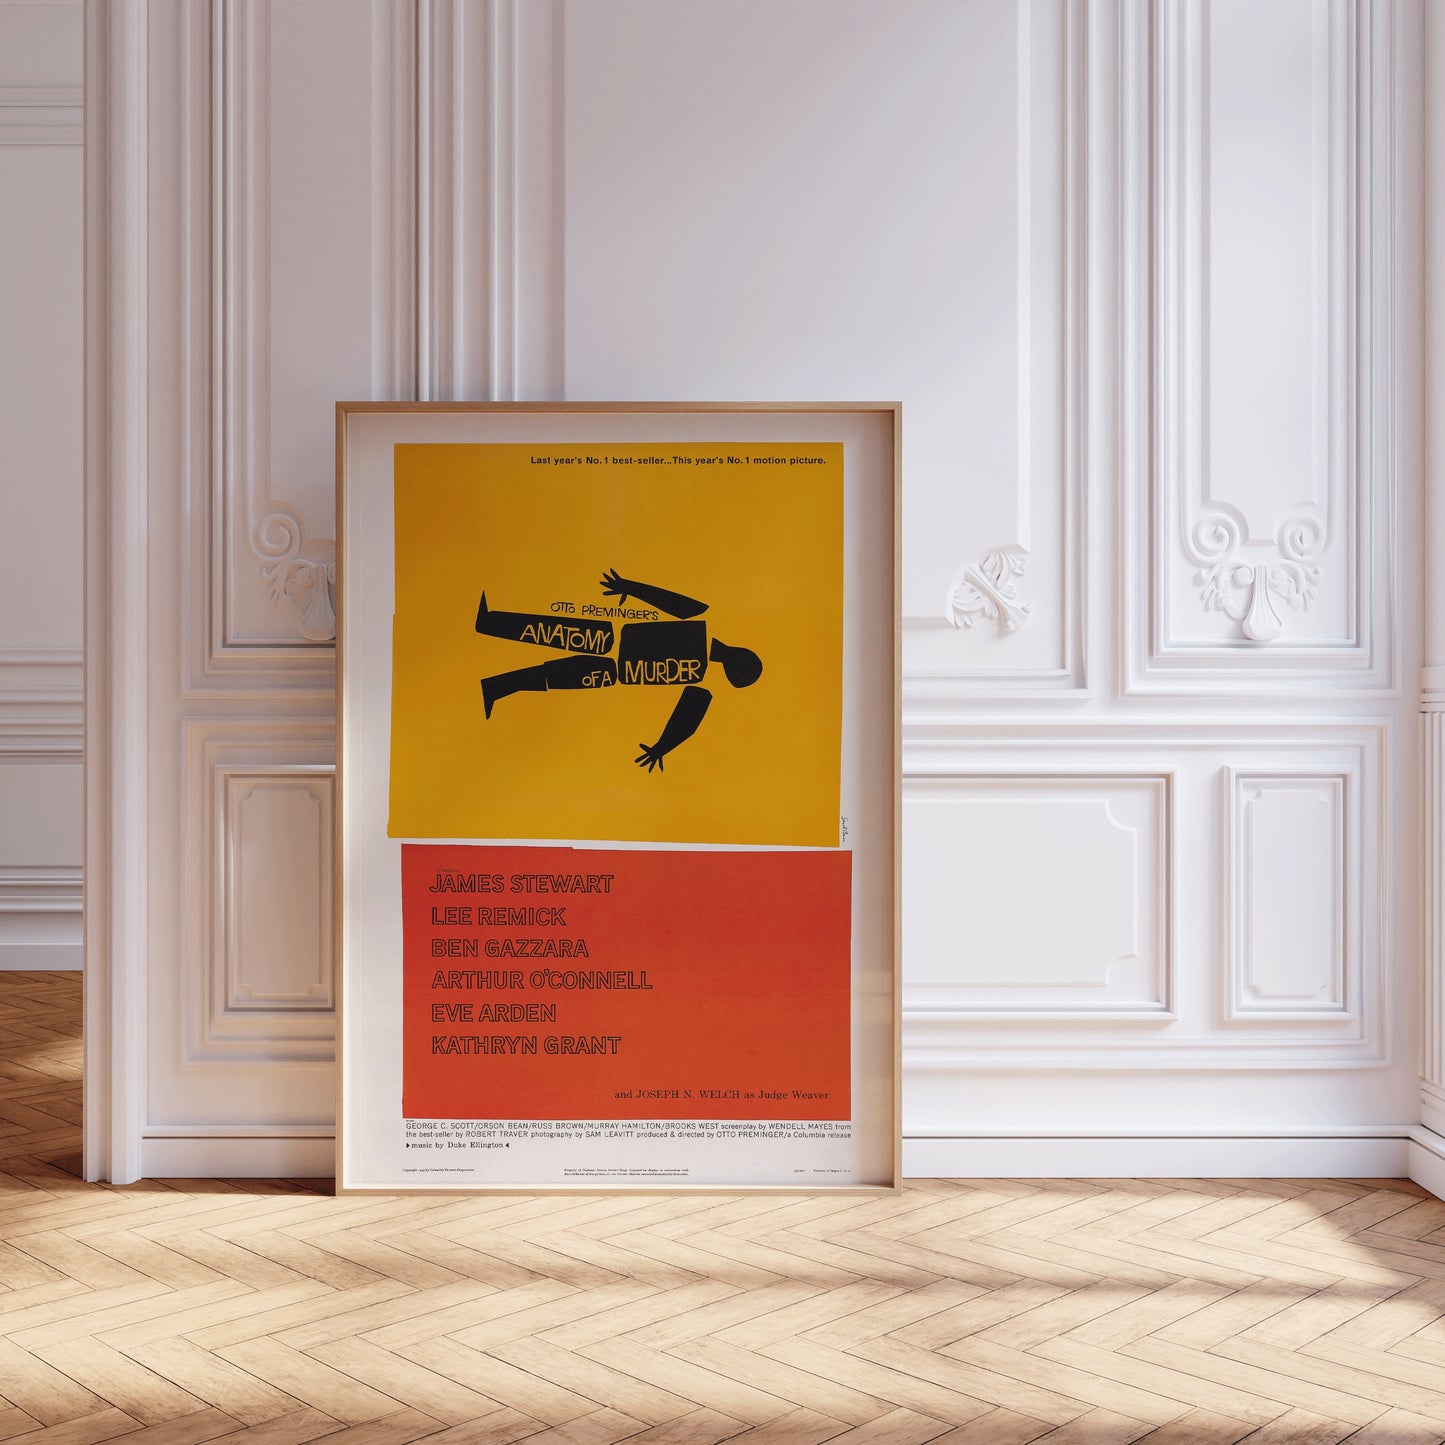 Anatomy of a Murder - Alfred Hitchcock | Classic, Vintage Minimalist Movie Poster Designed by Saul Blass (available framed or unframed)